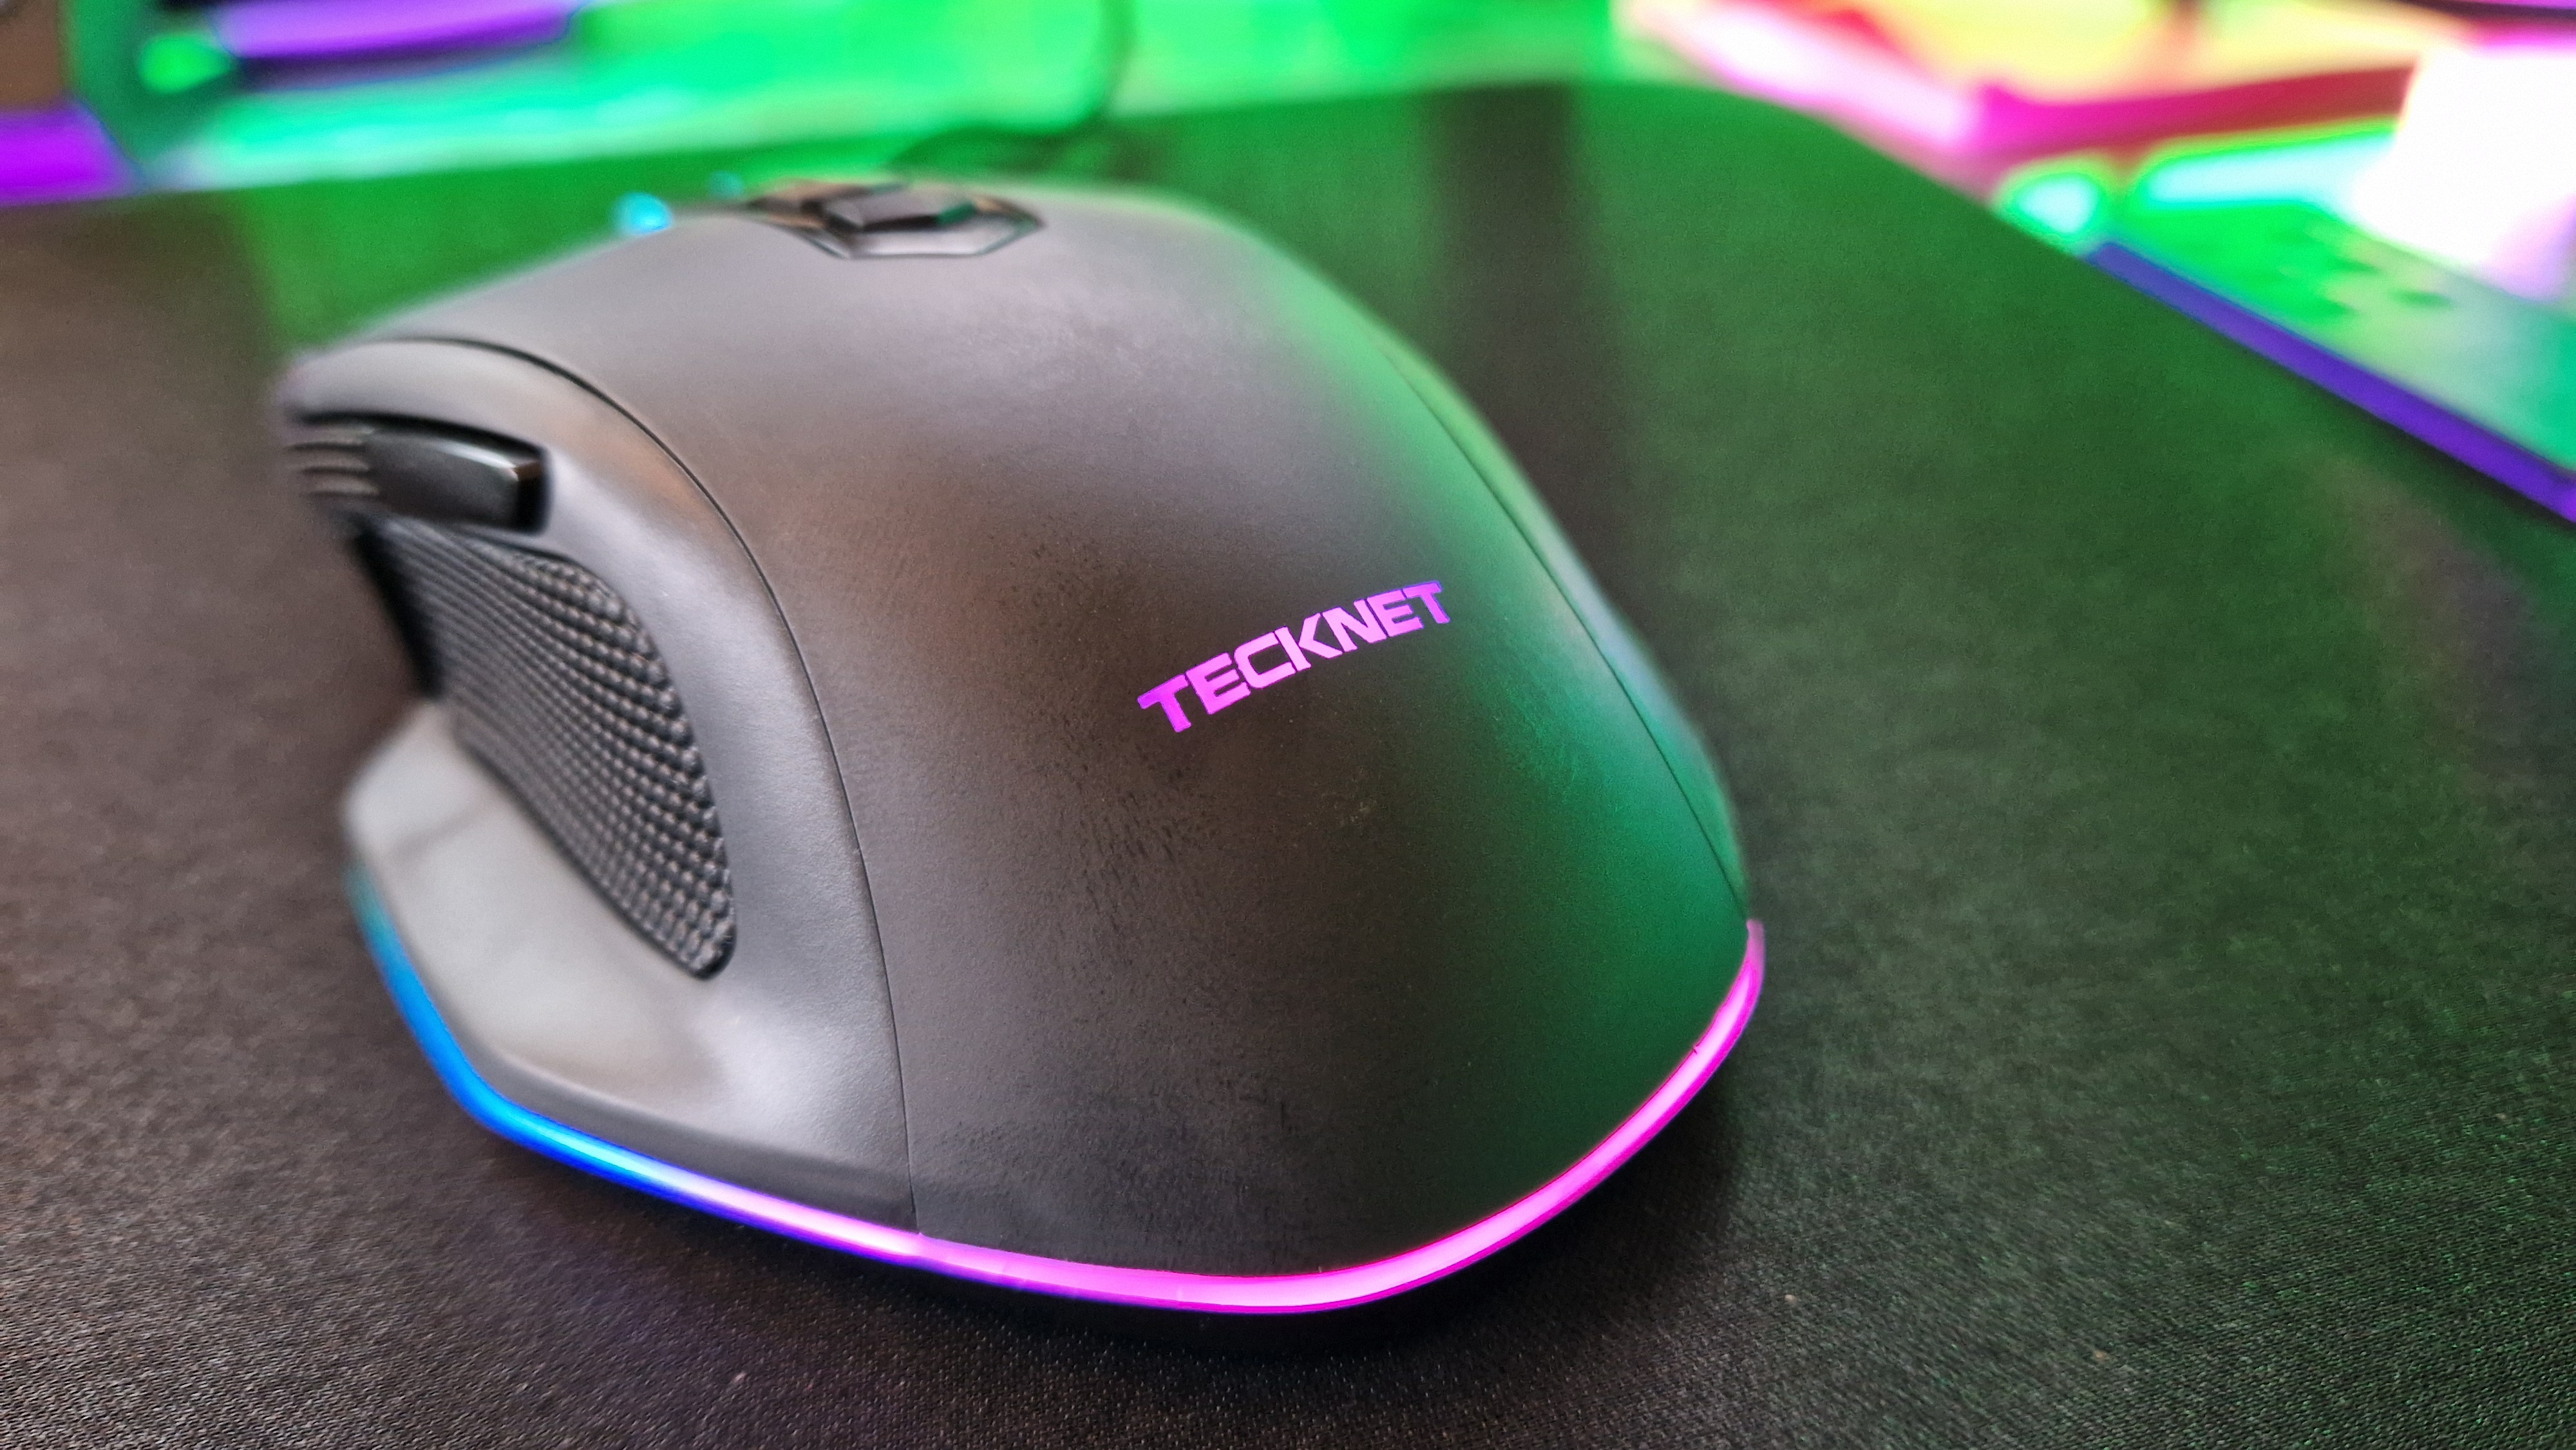 Tecknet's RGB branding on its gaming mouse